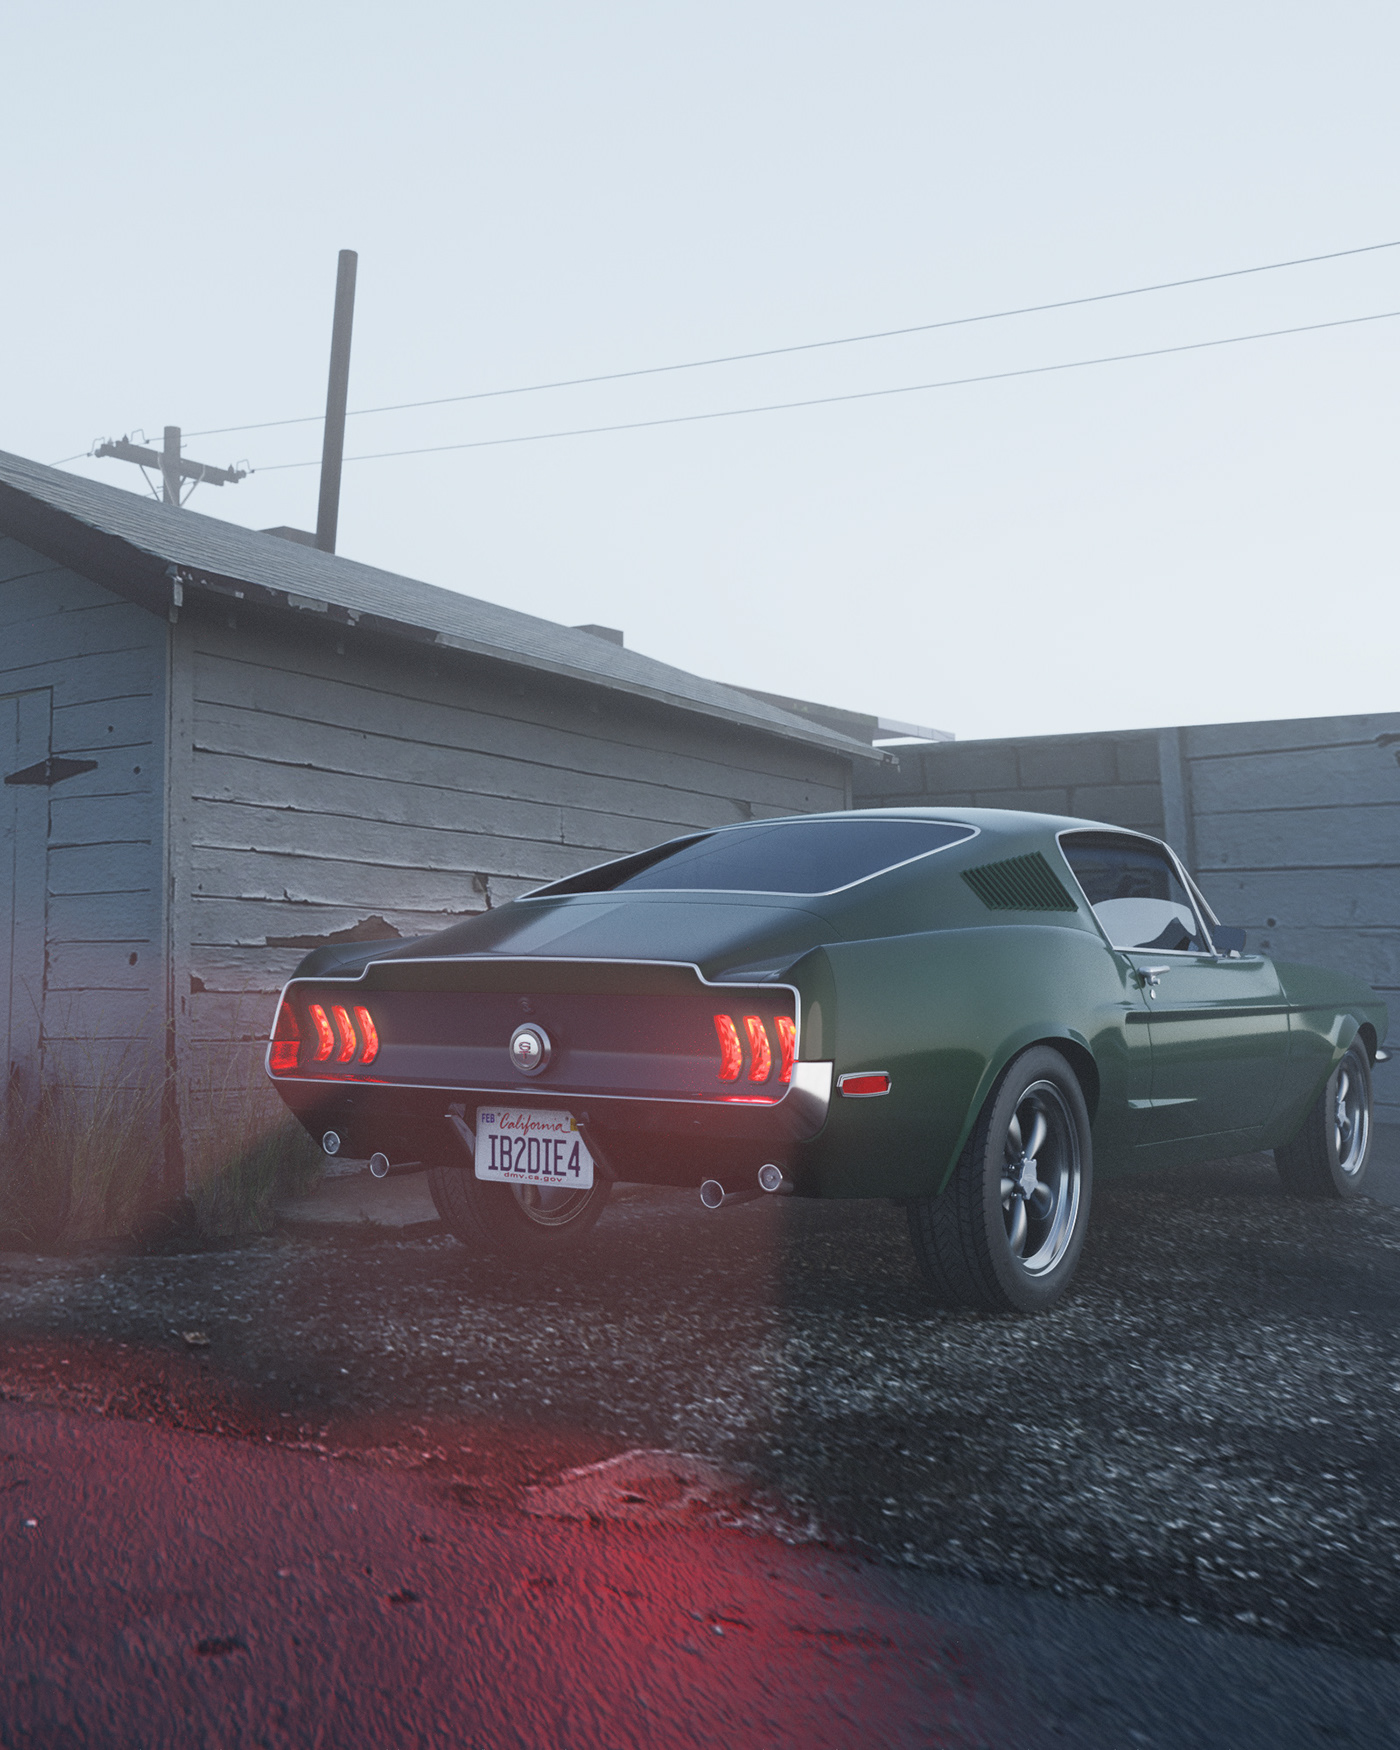 Cars classical cars 1970s Mustang Pontiac challenger 3D fog neon